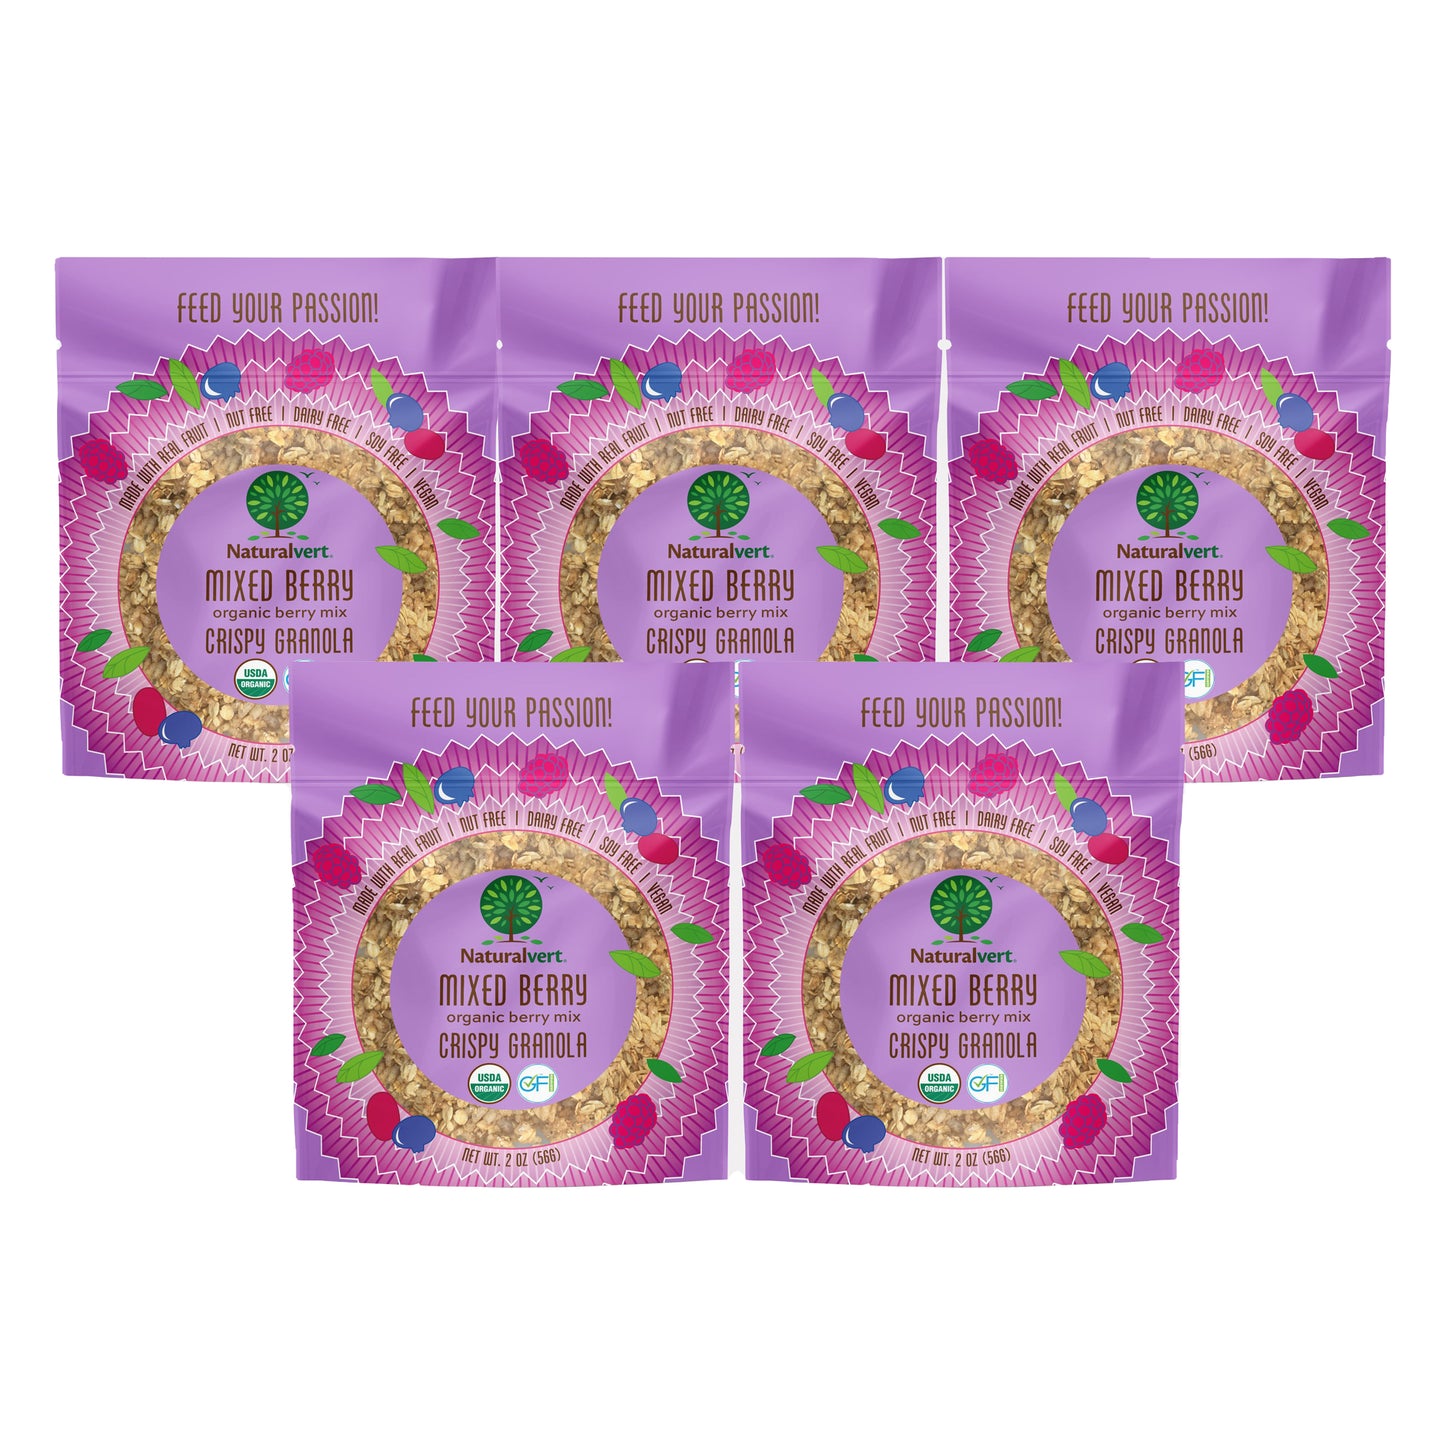 Organic, Gluten-free, vegan granola. made with real fruit. Nut free, soy free, dairy free. flavor Mixed Berry 2oz pack of 5